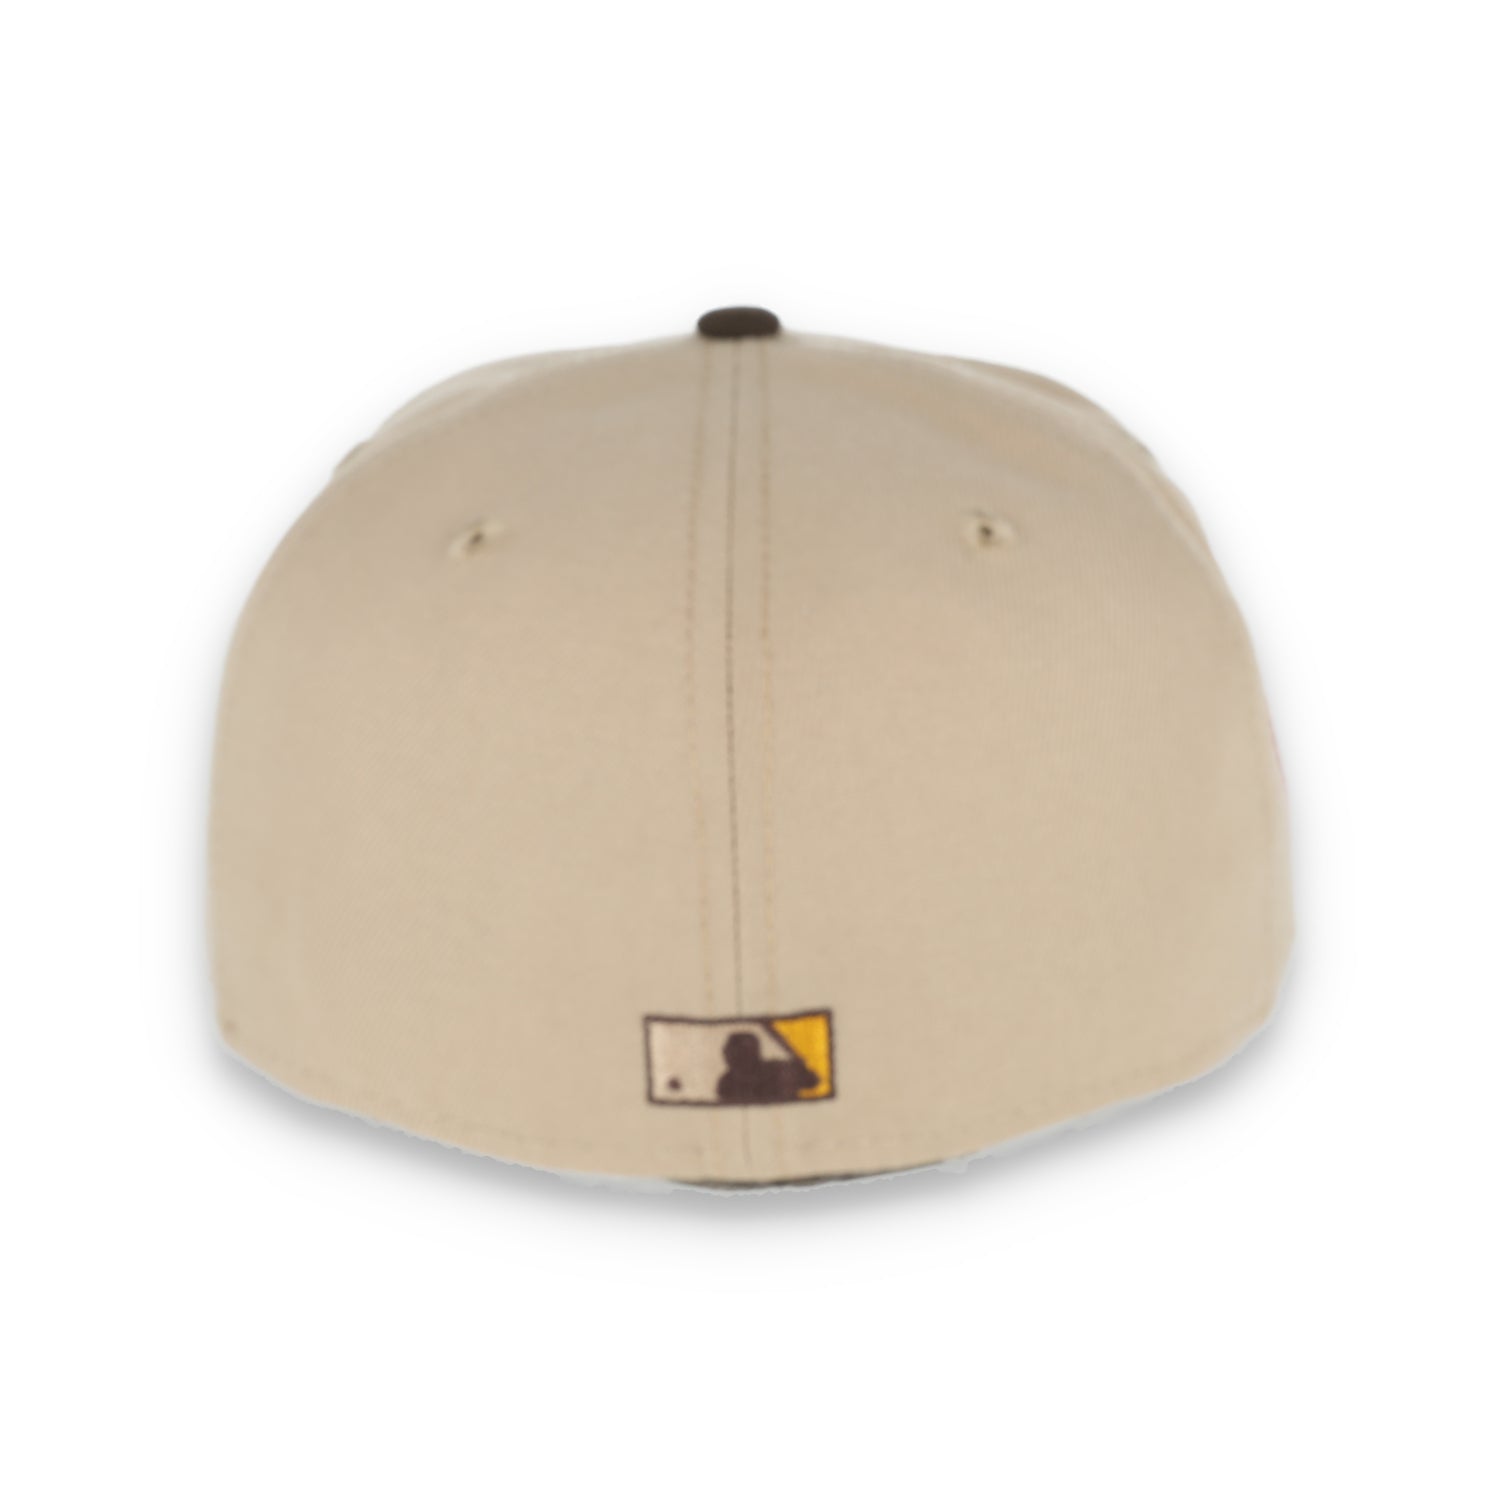 New Era California Angels 25TH ANNIVERSARY 59FIFTY FITTED HAT-CAMEL/BURNT WOOD